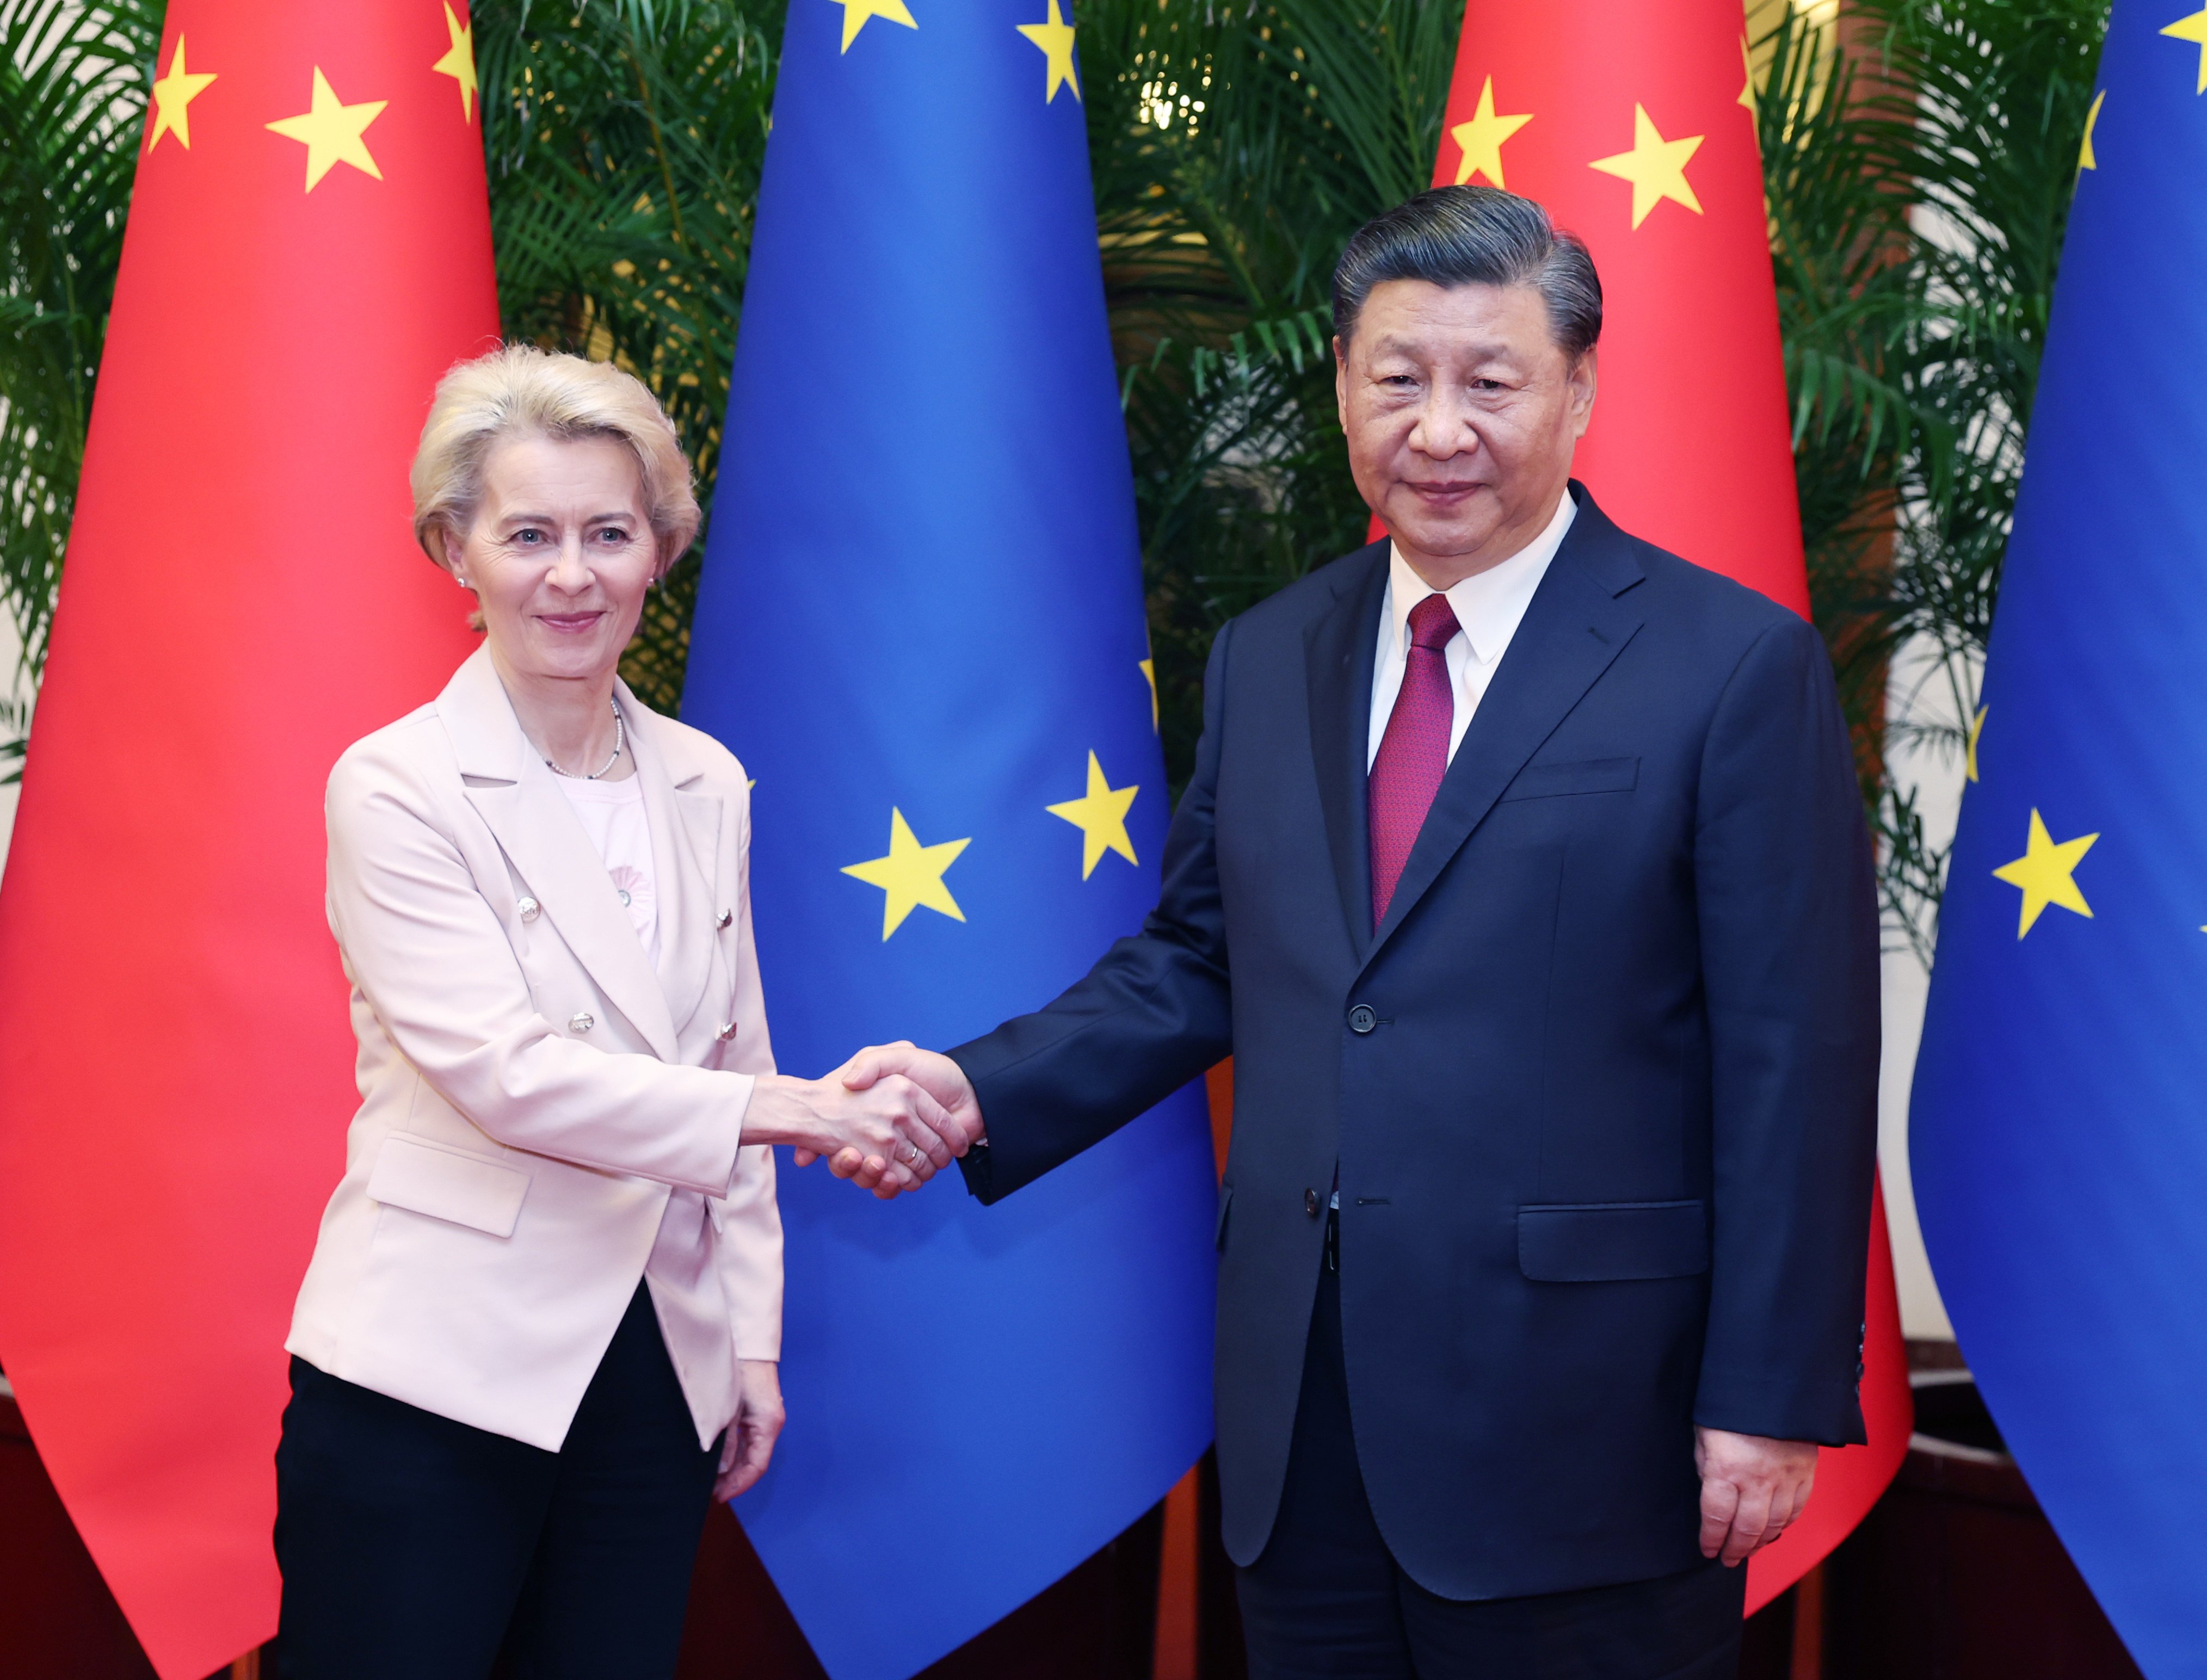 European Commission President Ursula von der Leyen meets Chinese President Xi Jinping at the Great Hall of the People in Beijing on Thursday. Photo: Xinhua